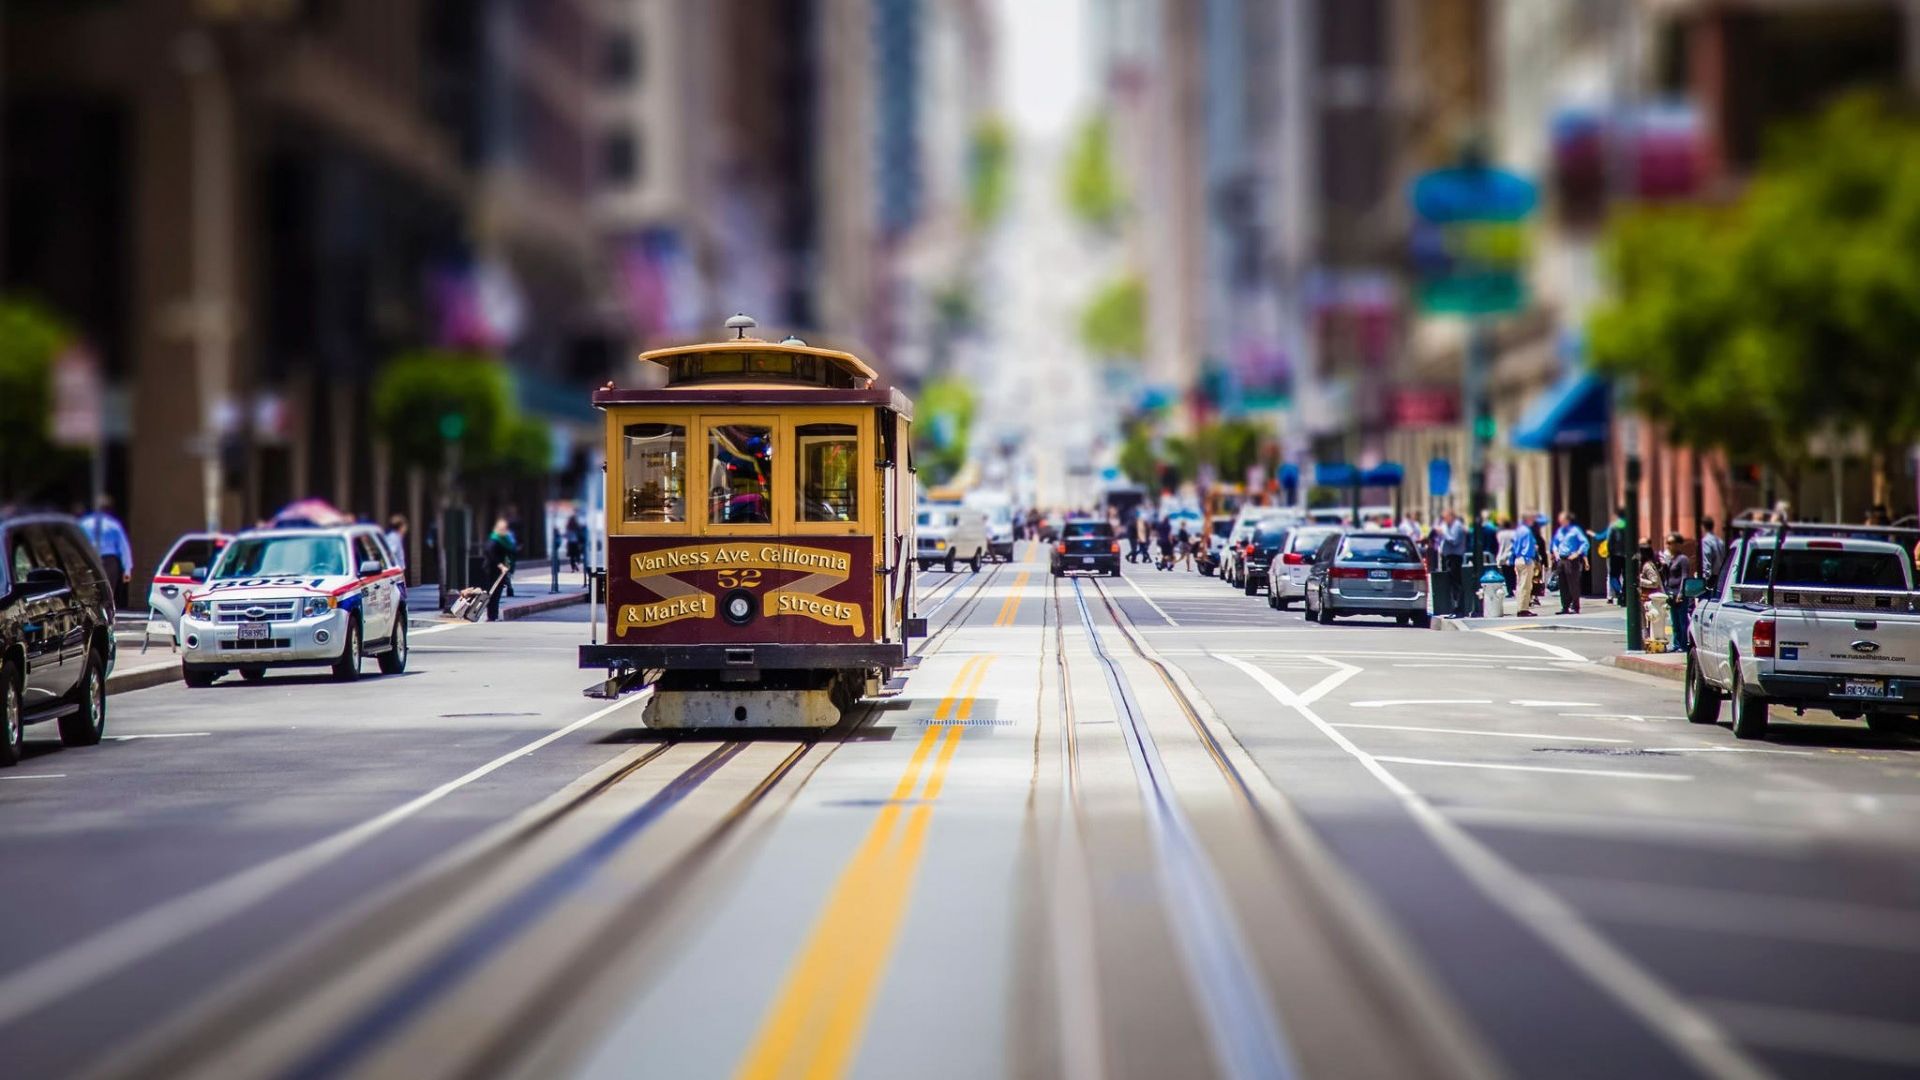 Desktop Wallpaper San Francisco Street View, Hd Image, Picture, Background,  9i6ytb